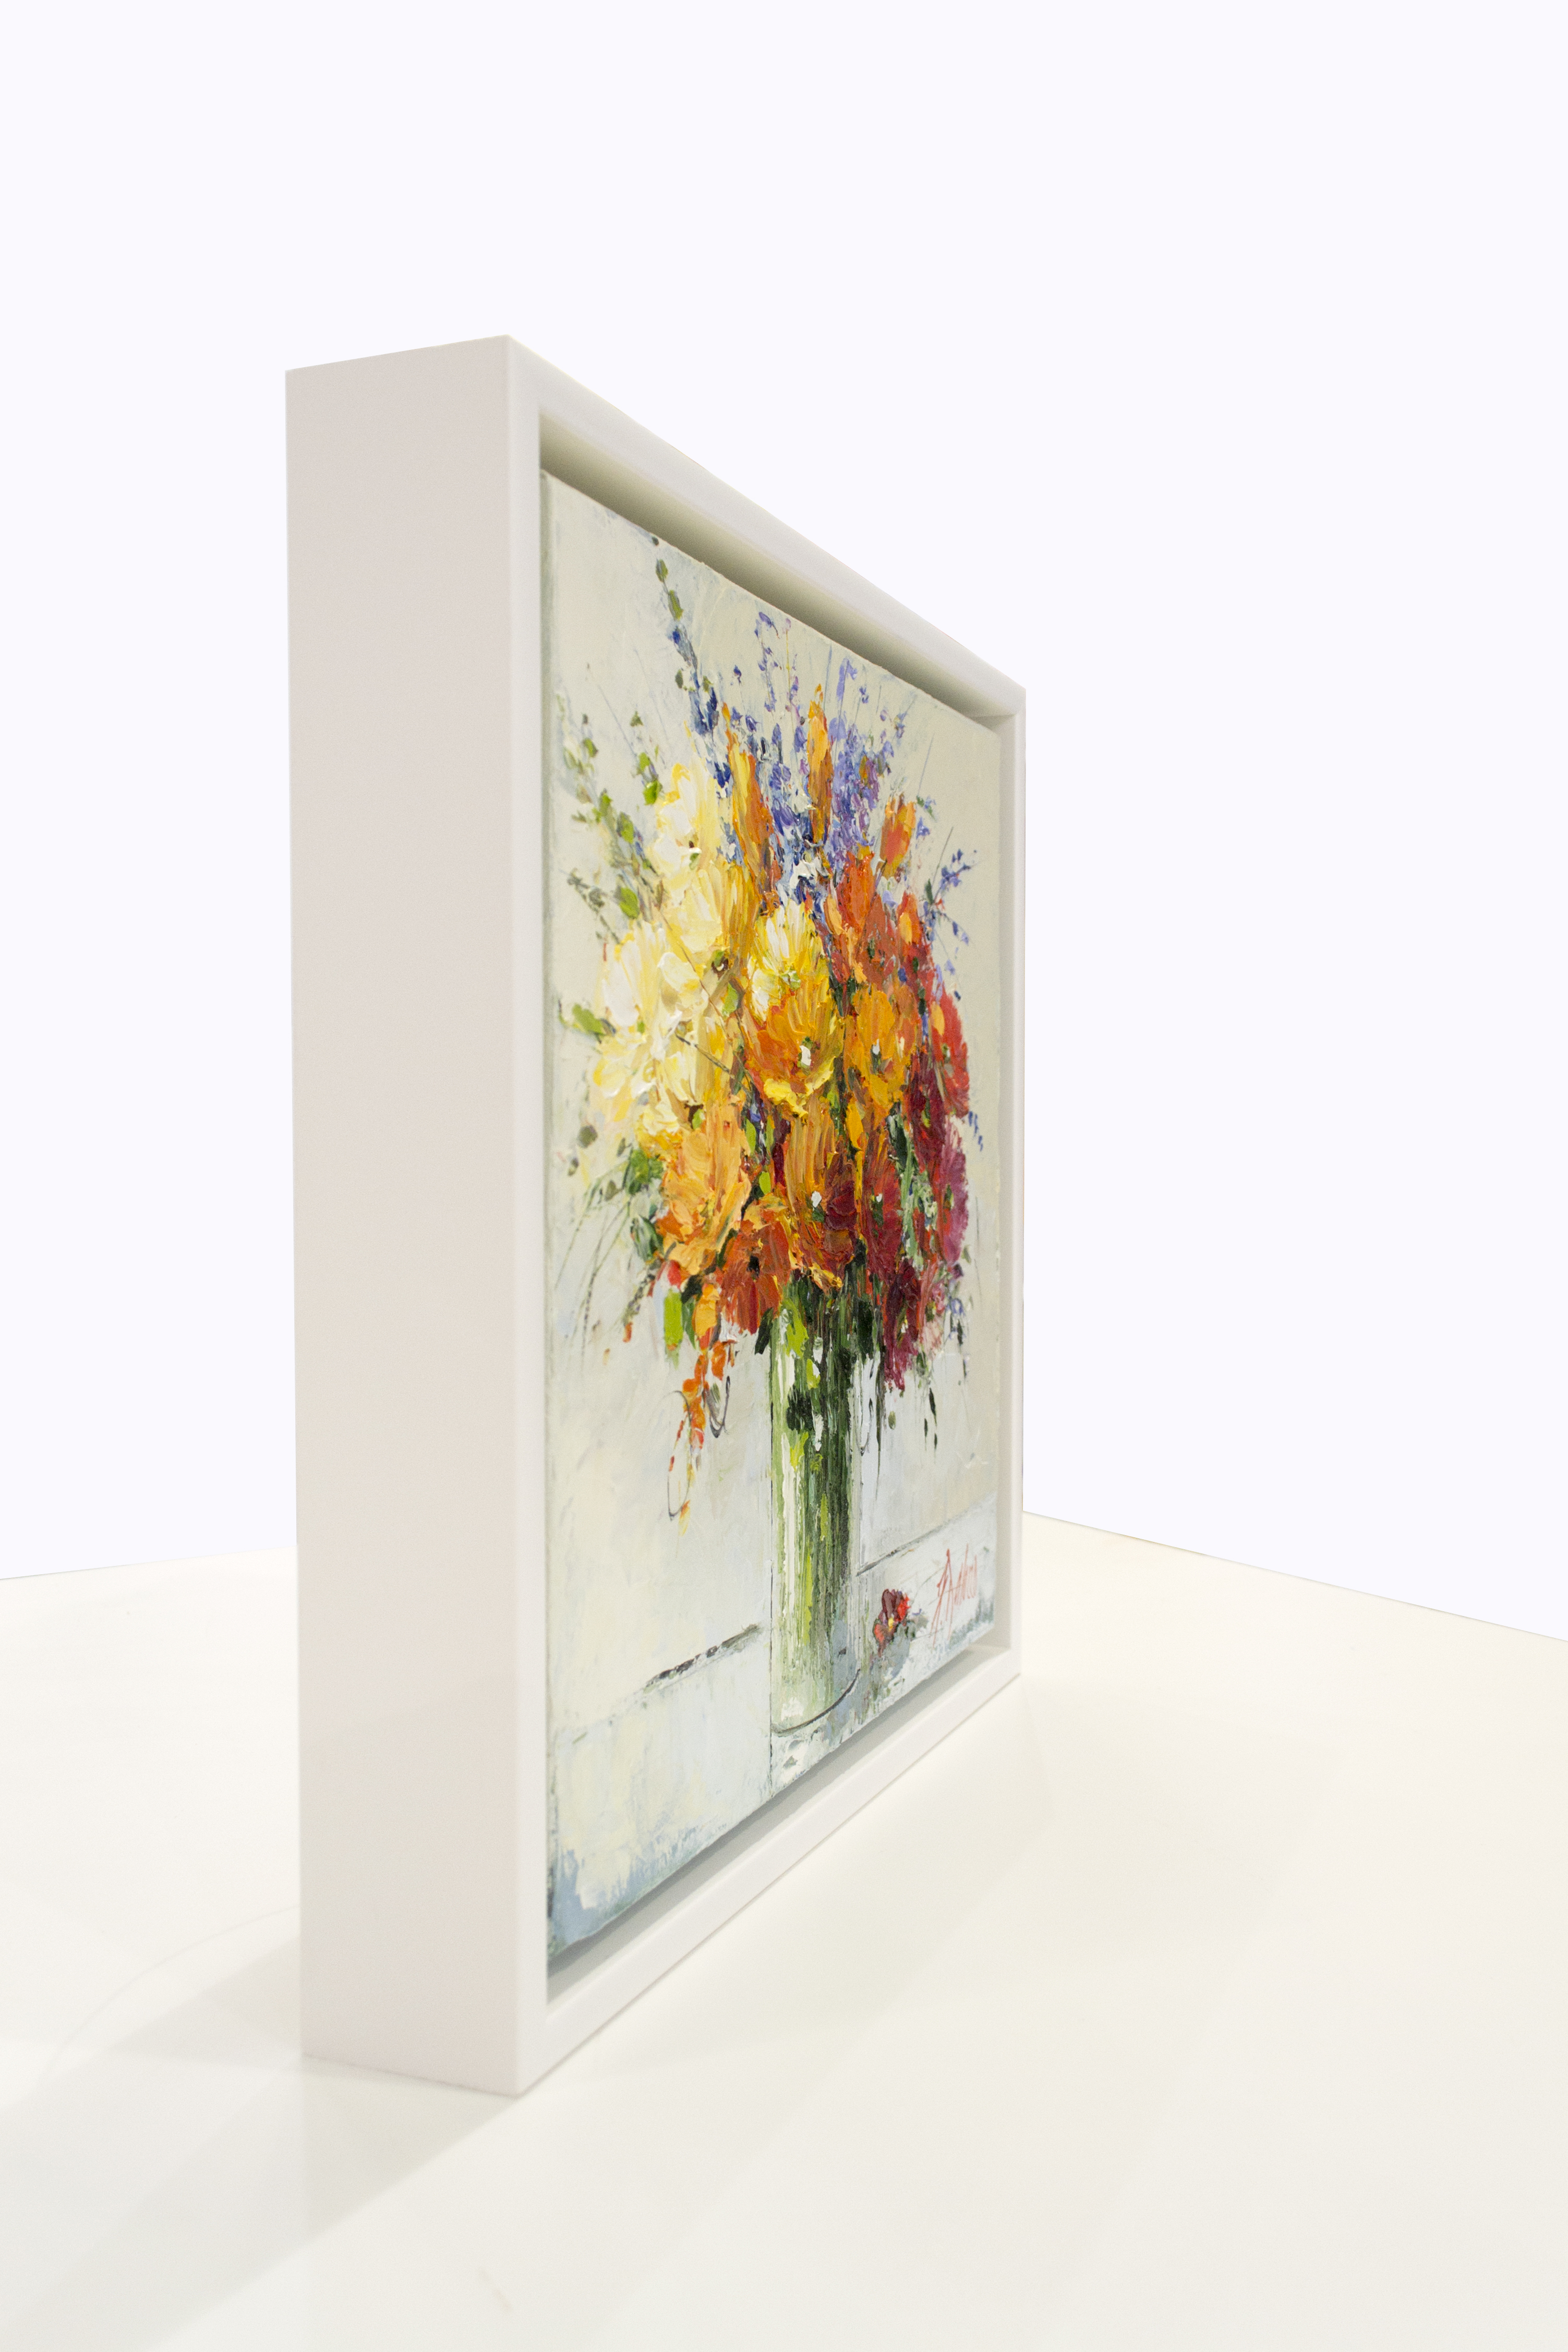 Framed Side View Of Still Life Painting "Sunburnt Bouquet" By Judith Dalozzo